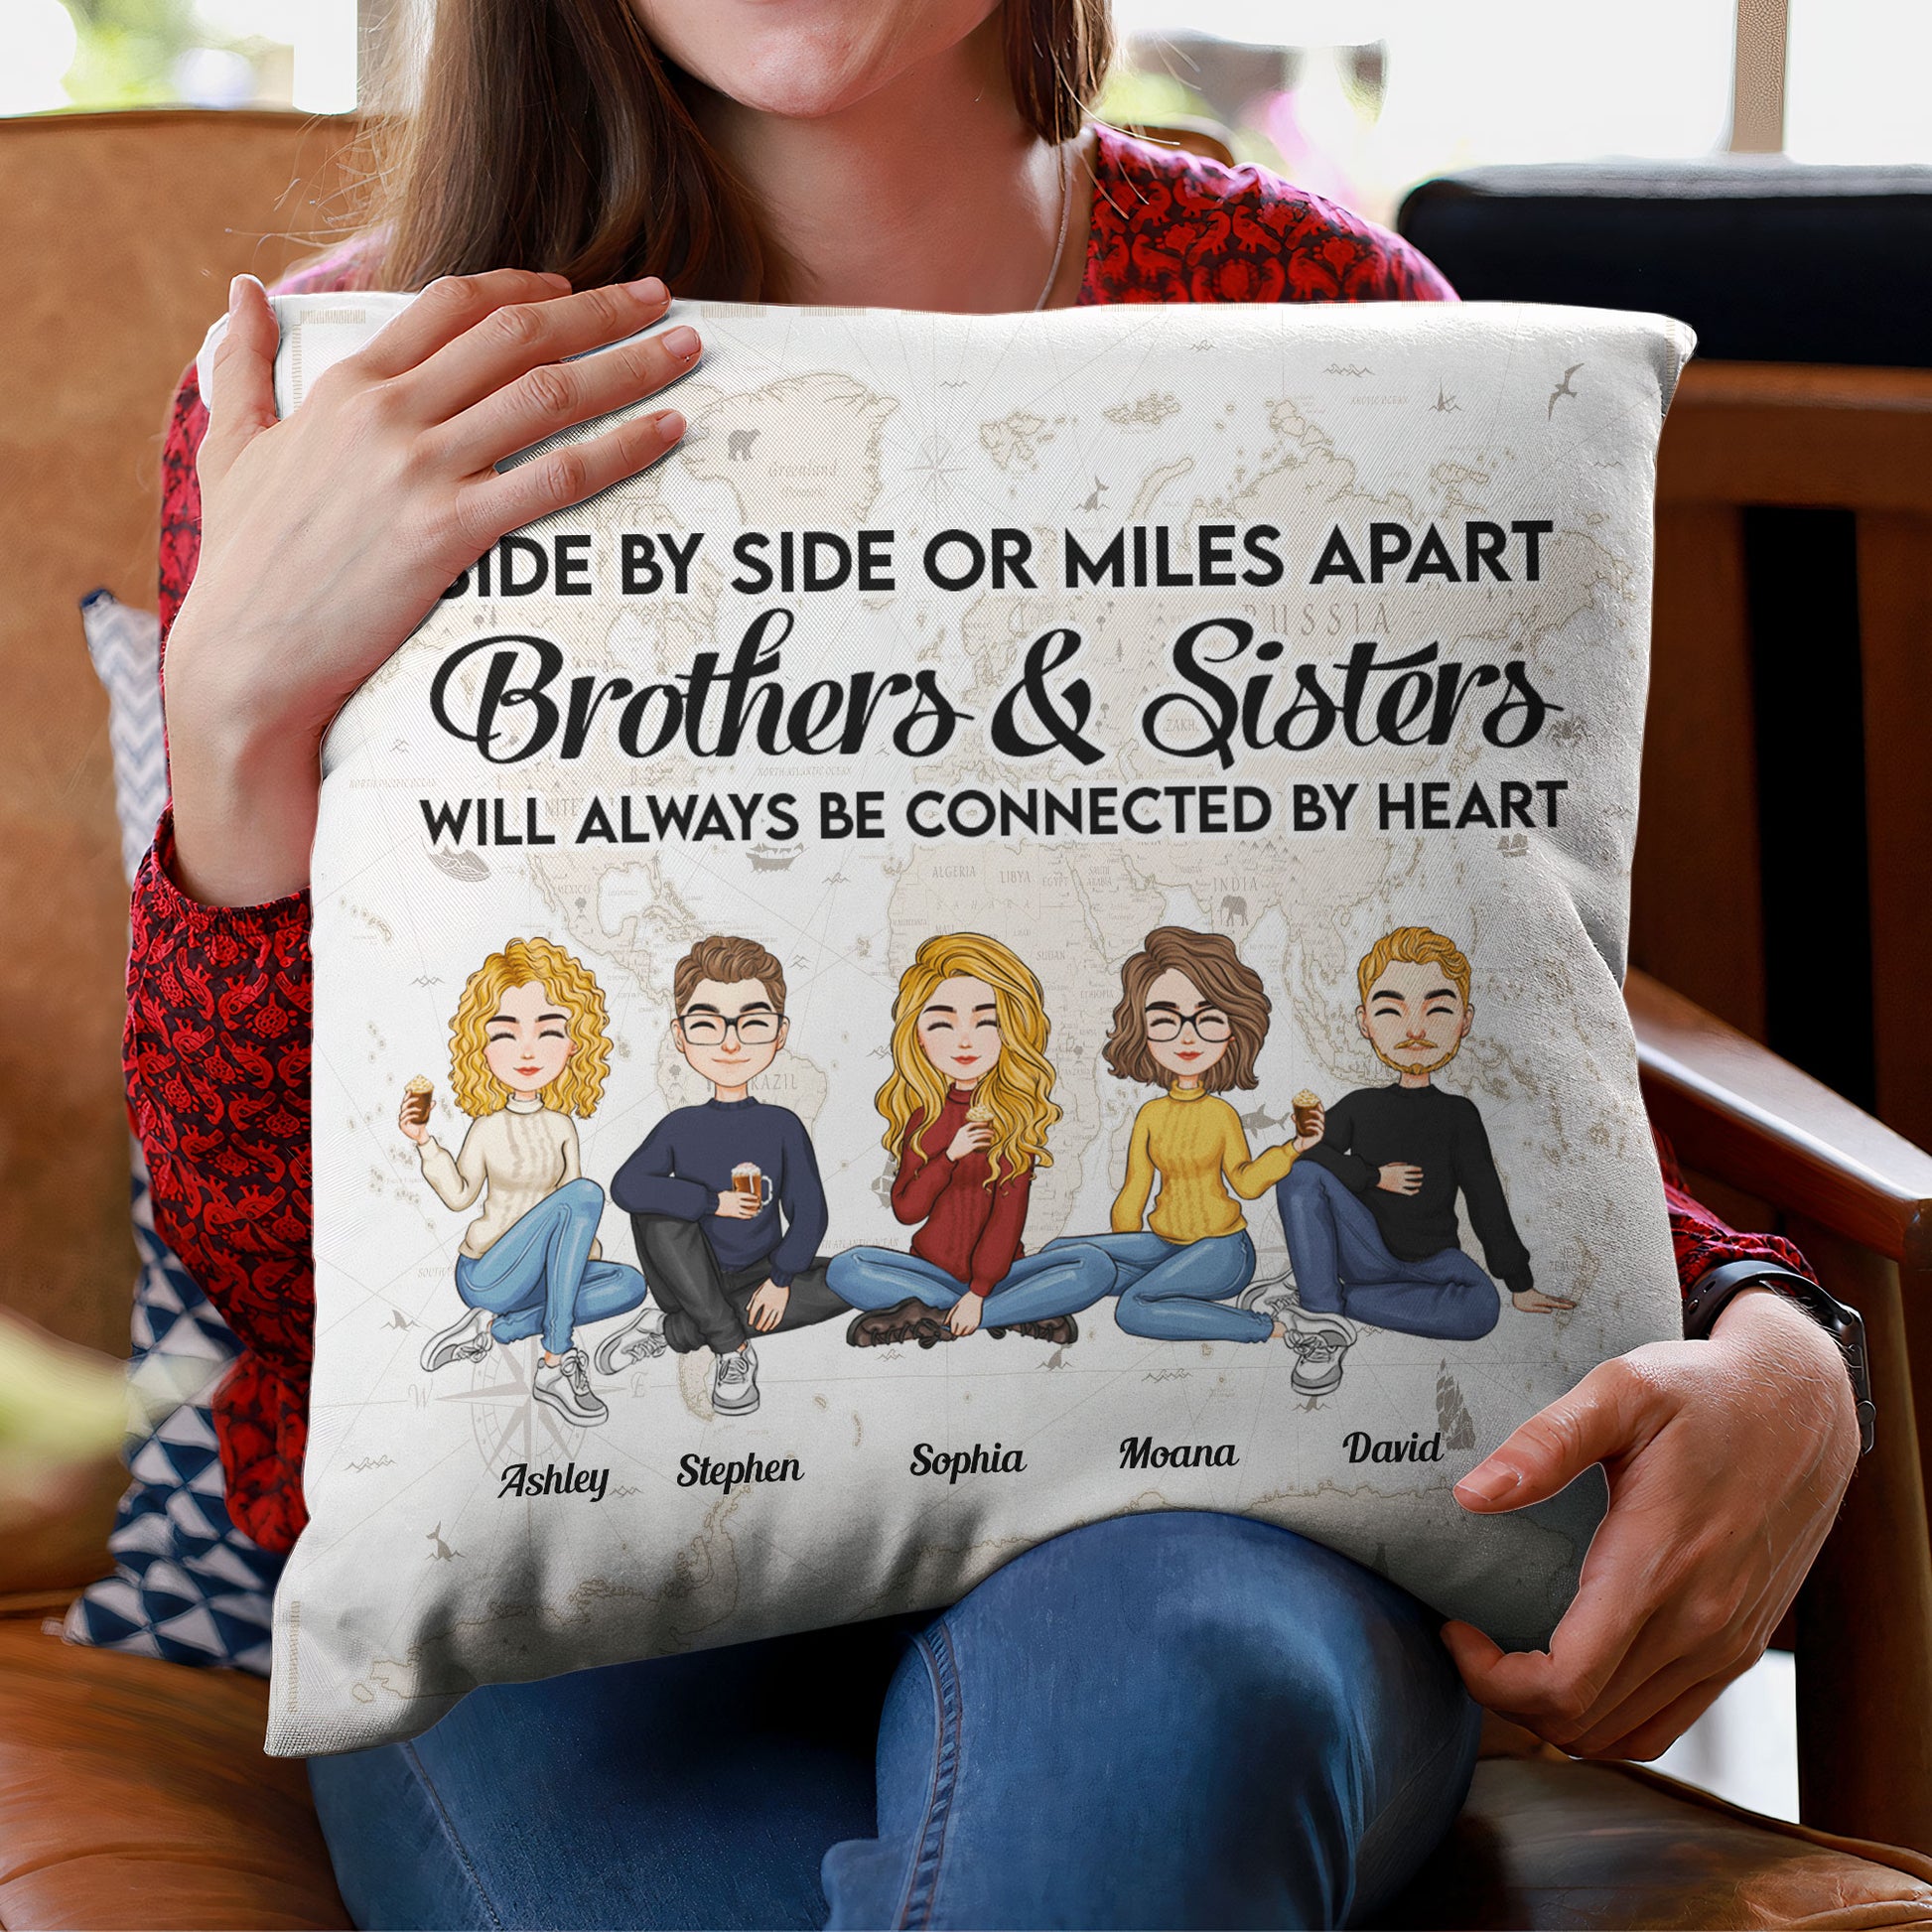 Brothers & Sisters - Always Be Connected By Heart  - Personalized Pillow - Anniversary, Birthday, Home Decor Gift For Family, Sisters, Brothers, Siblings